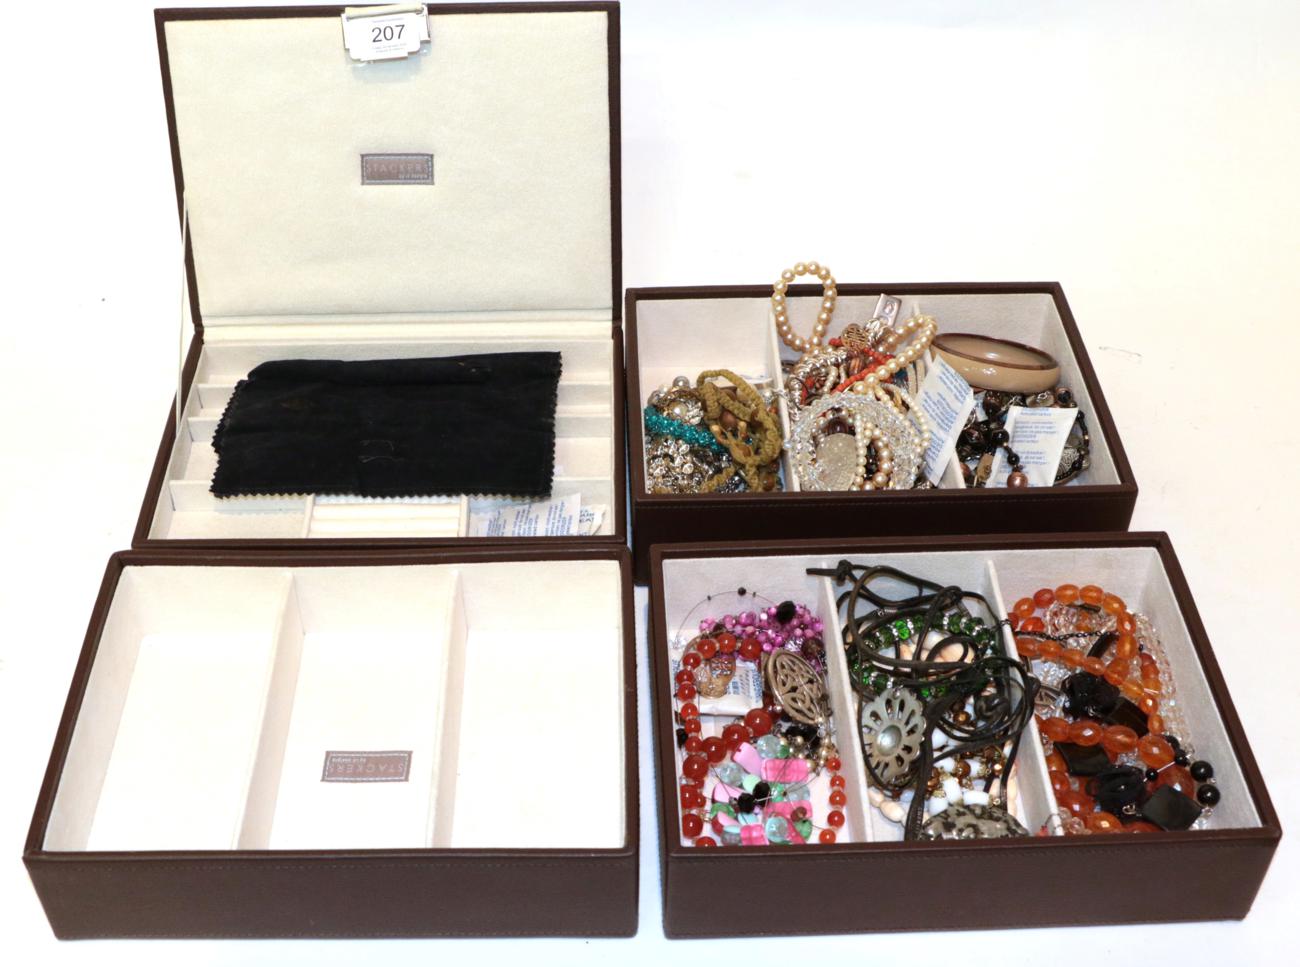 Lot 207 - A collection of silver and costume jewellery including brooches, beads, bangles etc, in a stackable